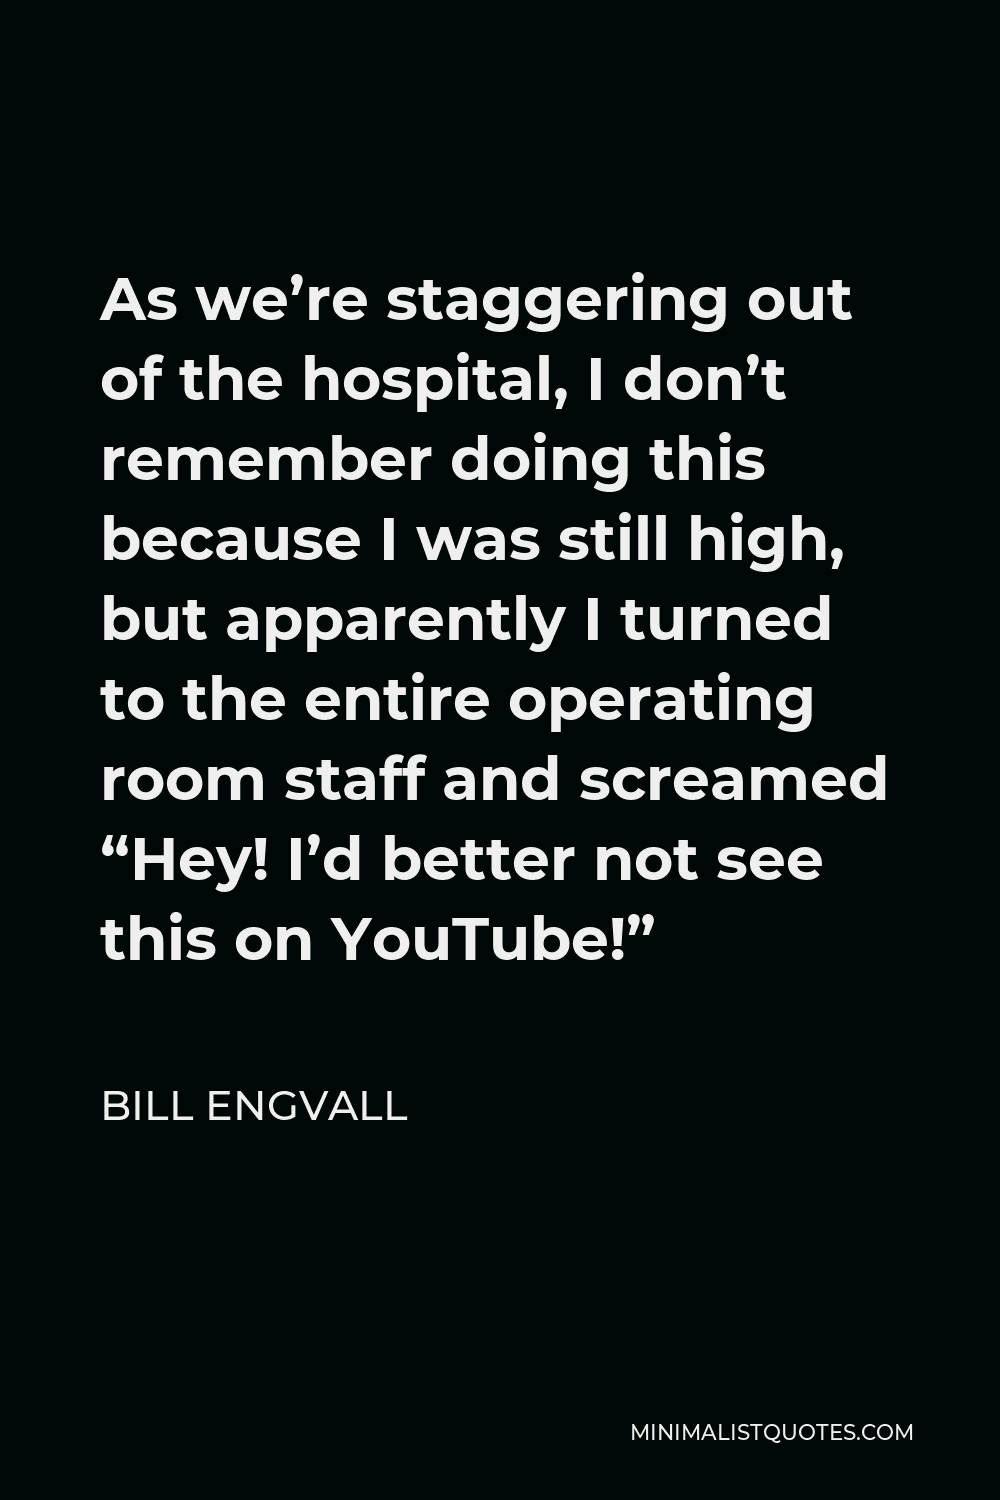 Bill Engvall Quote - As we’re staggering out of the hospital, I don’t remember doing this because I was still high, but apparently I turned to the entire operating room staff and screamed “Hey! I’d better not see this on YouTube!”